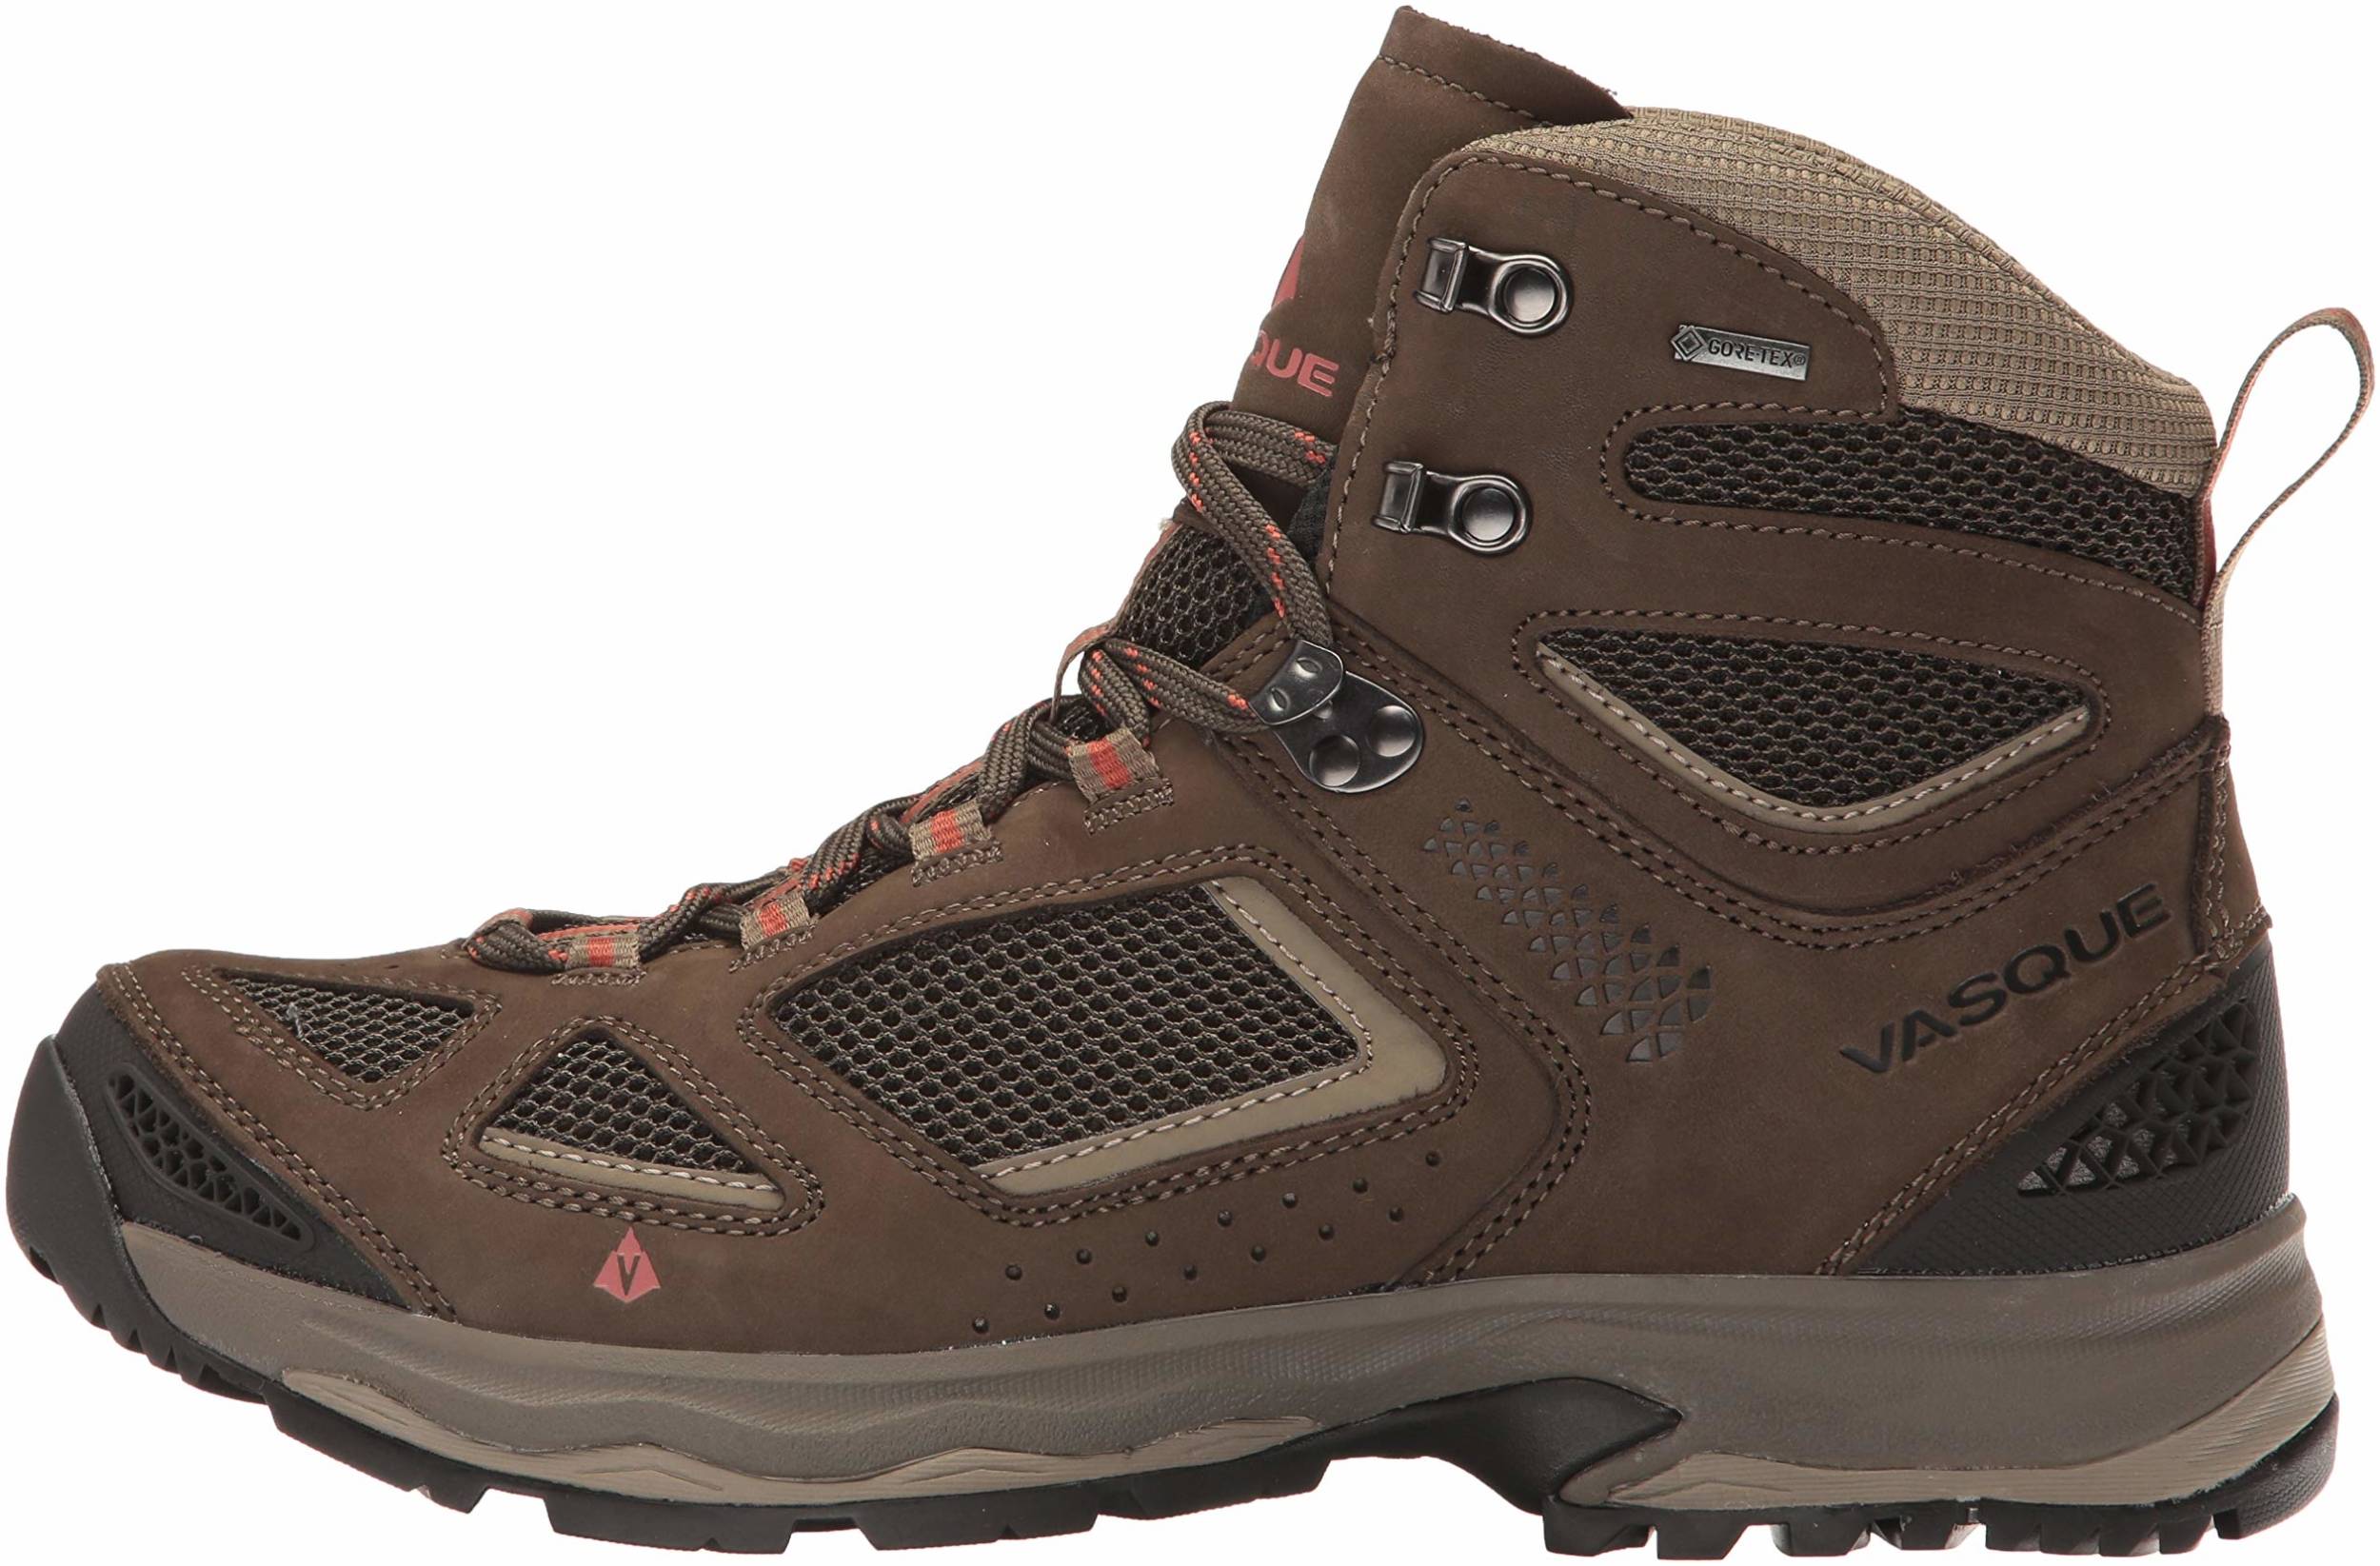 Save 31% on Vasque Mid Cut Hiking Boots 